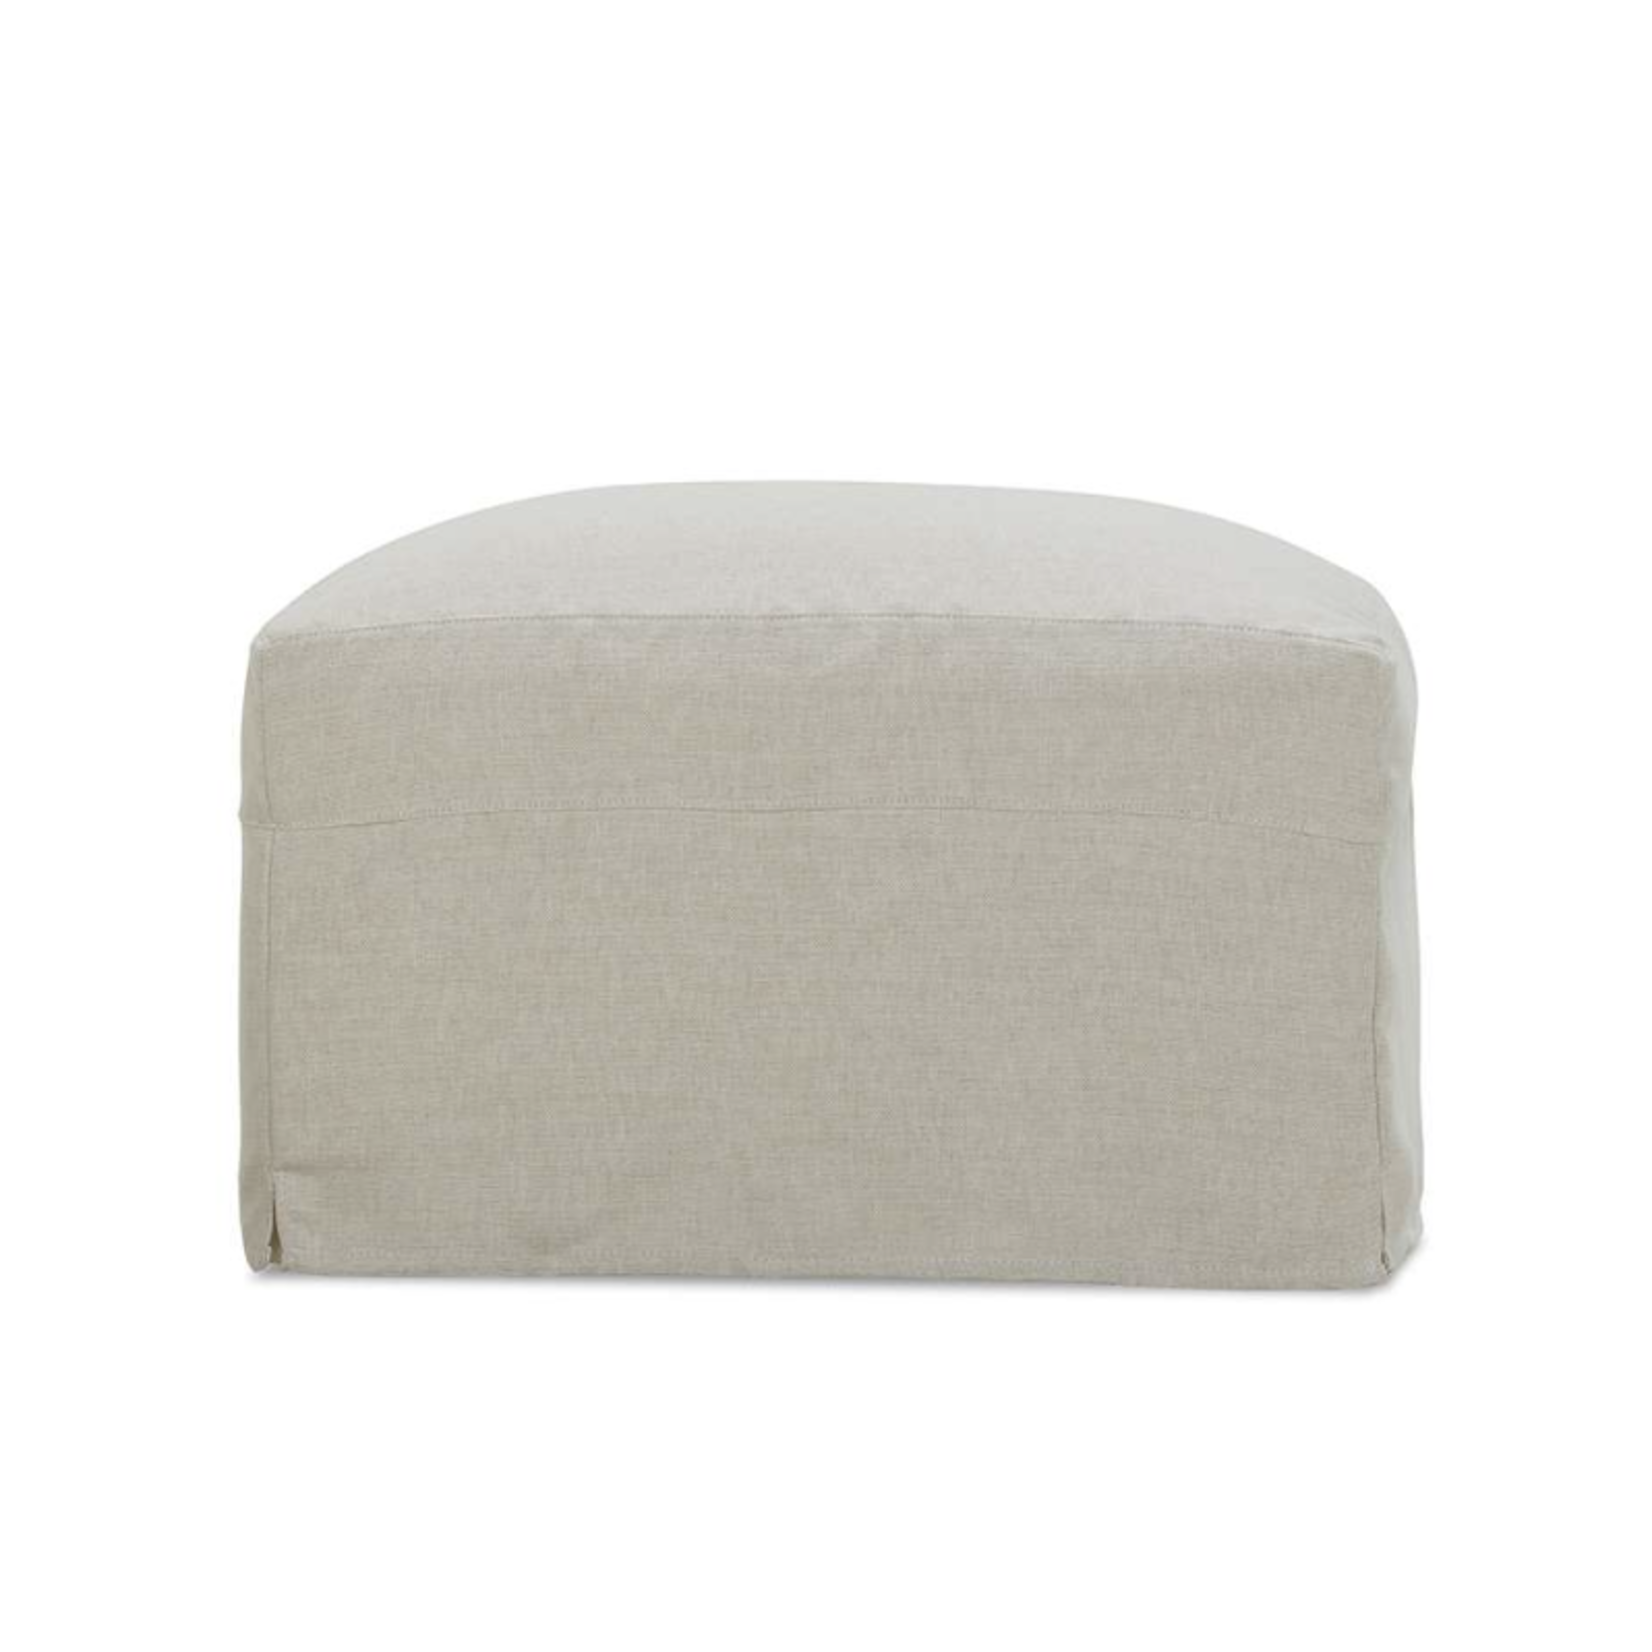 Outside The Box 27x23x19 Lilah Pearl Kid Proof Performance Slipcover Ottoman